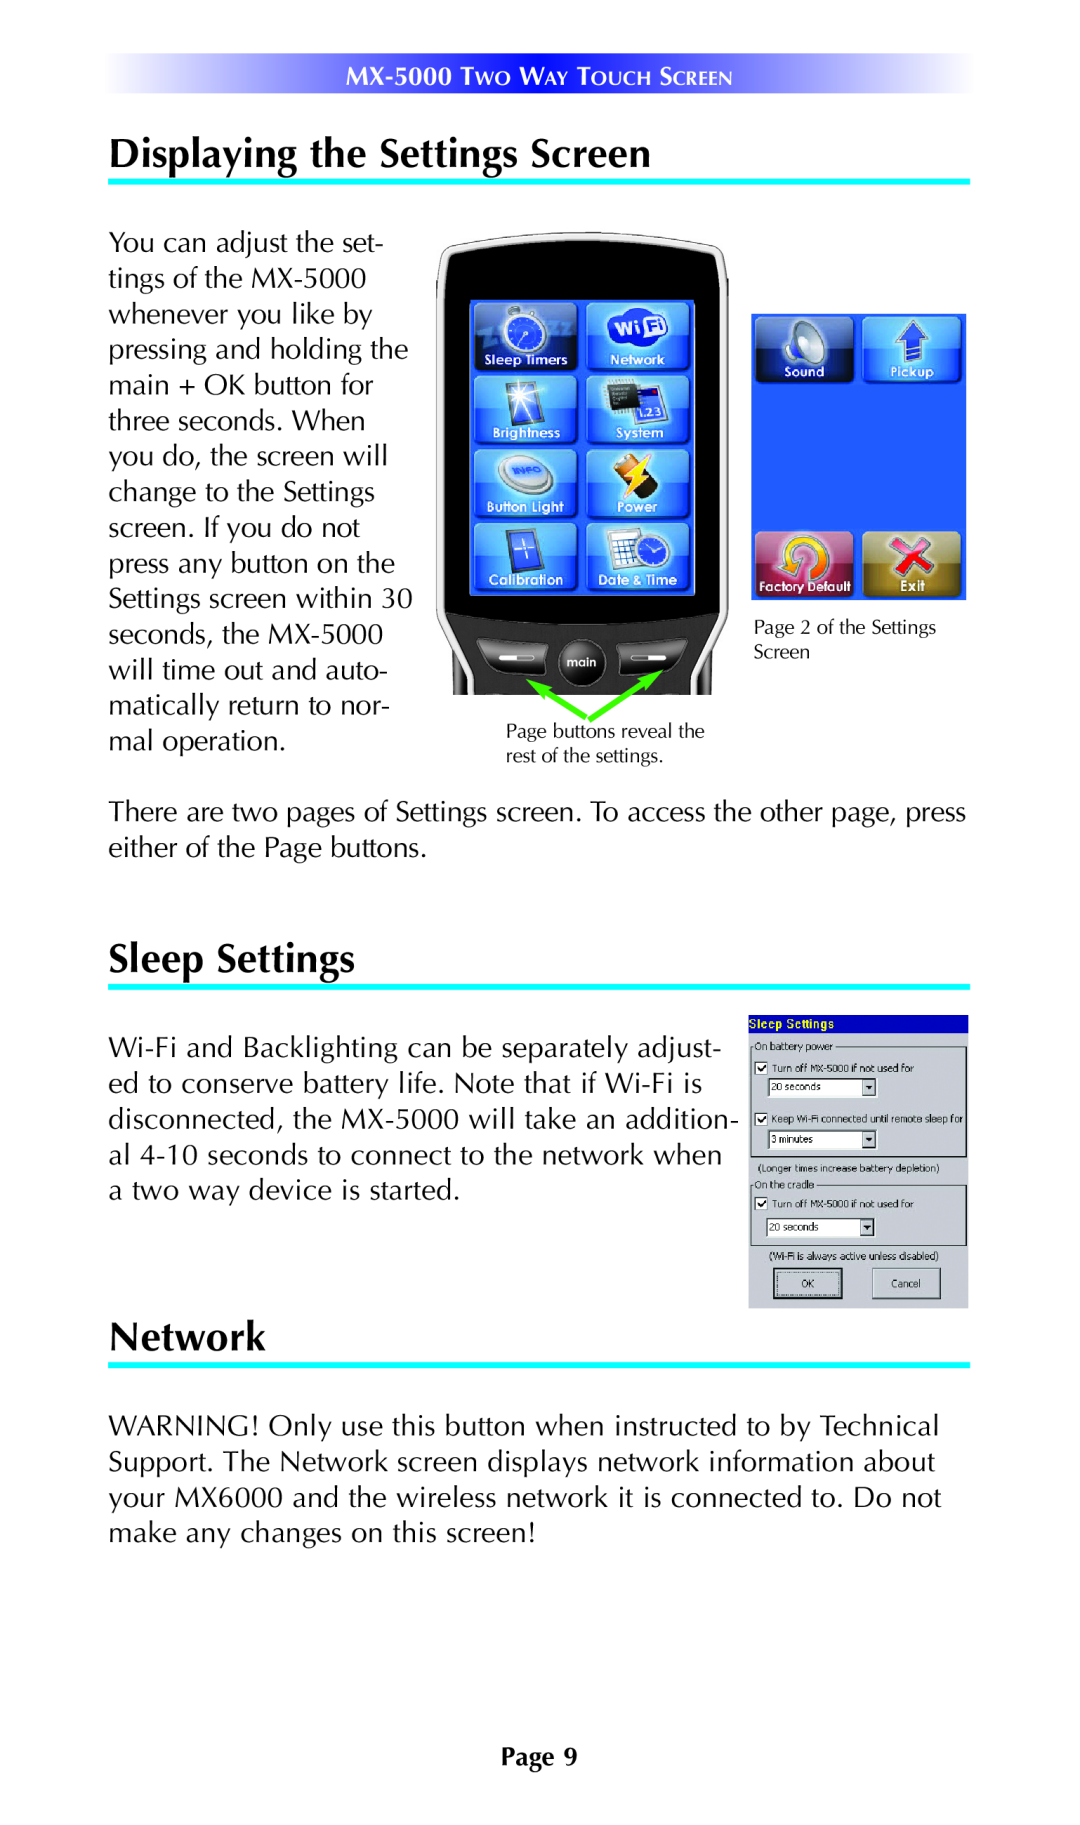 Universal Remote Control MX-5000 Displaying the Settings Screen, Sleep Settings, Network, Page 2 of the Settings Screen 